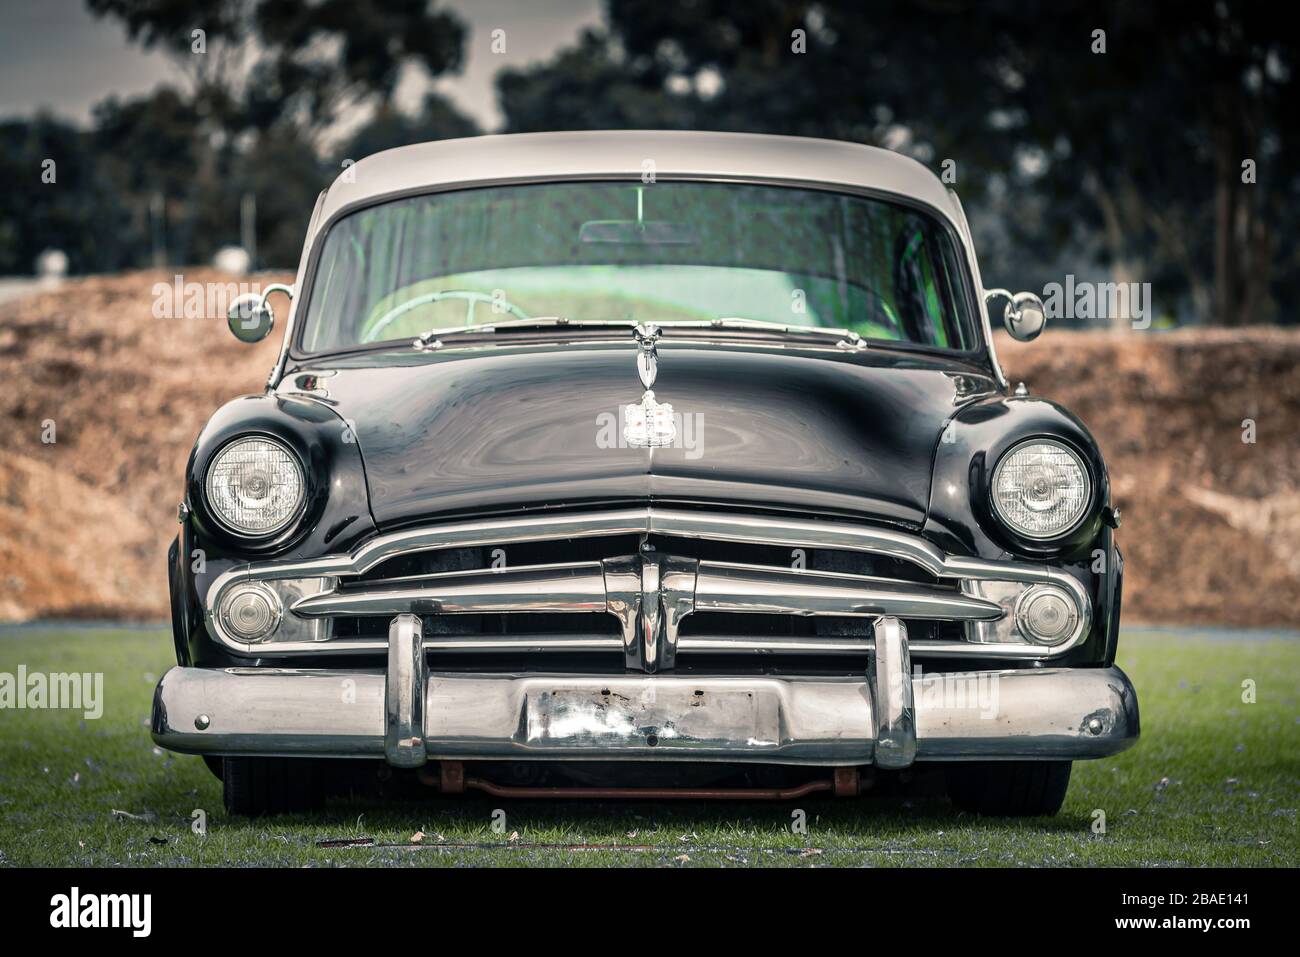 Adelaide, Australia - March 29, 2015: 1954 Dodge Coronet Custom parked on the grounds during car show, front view Stock Photo